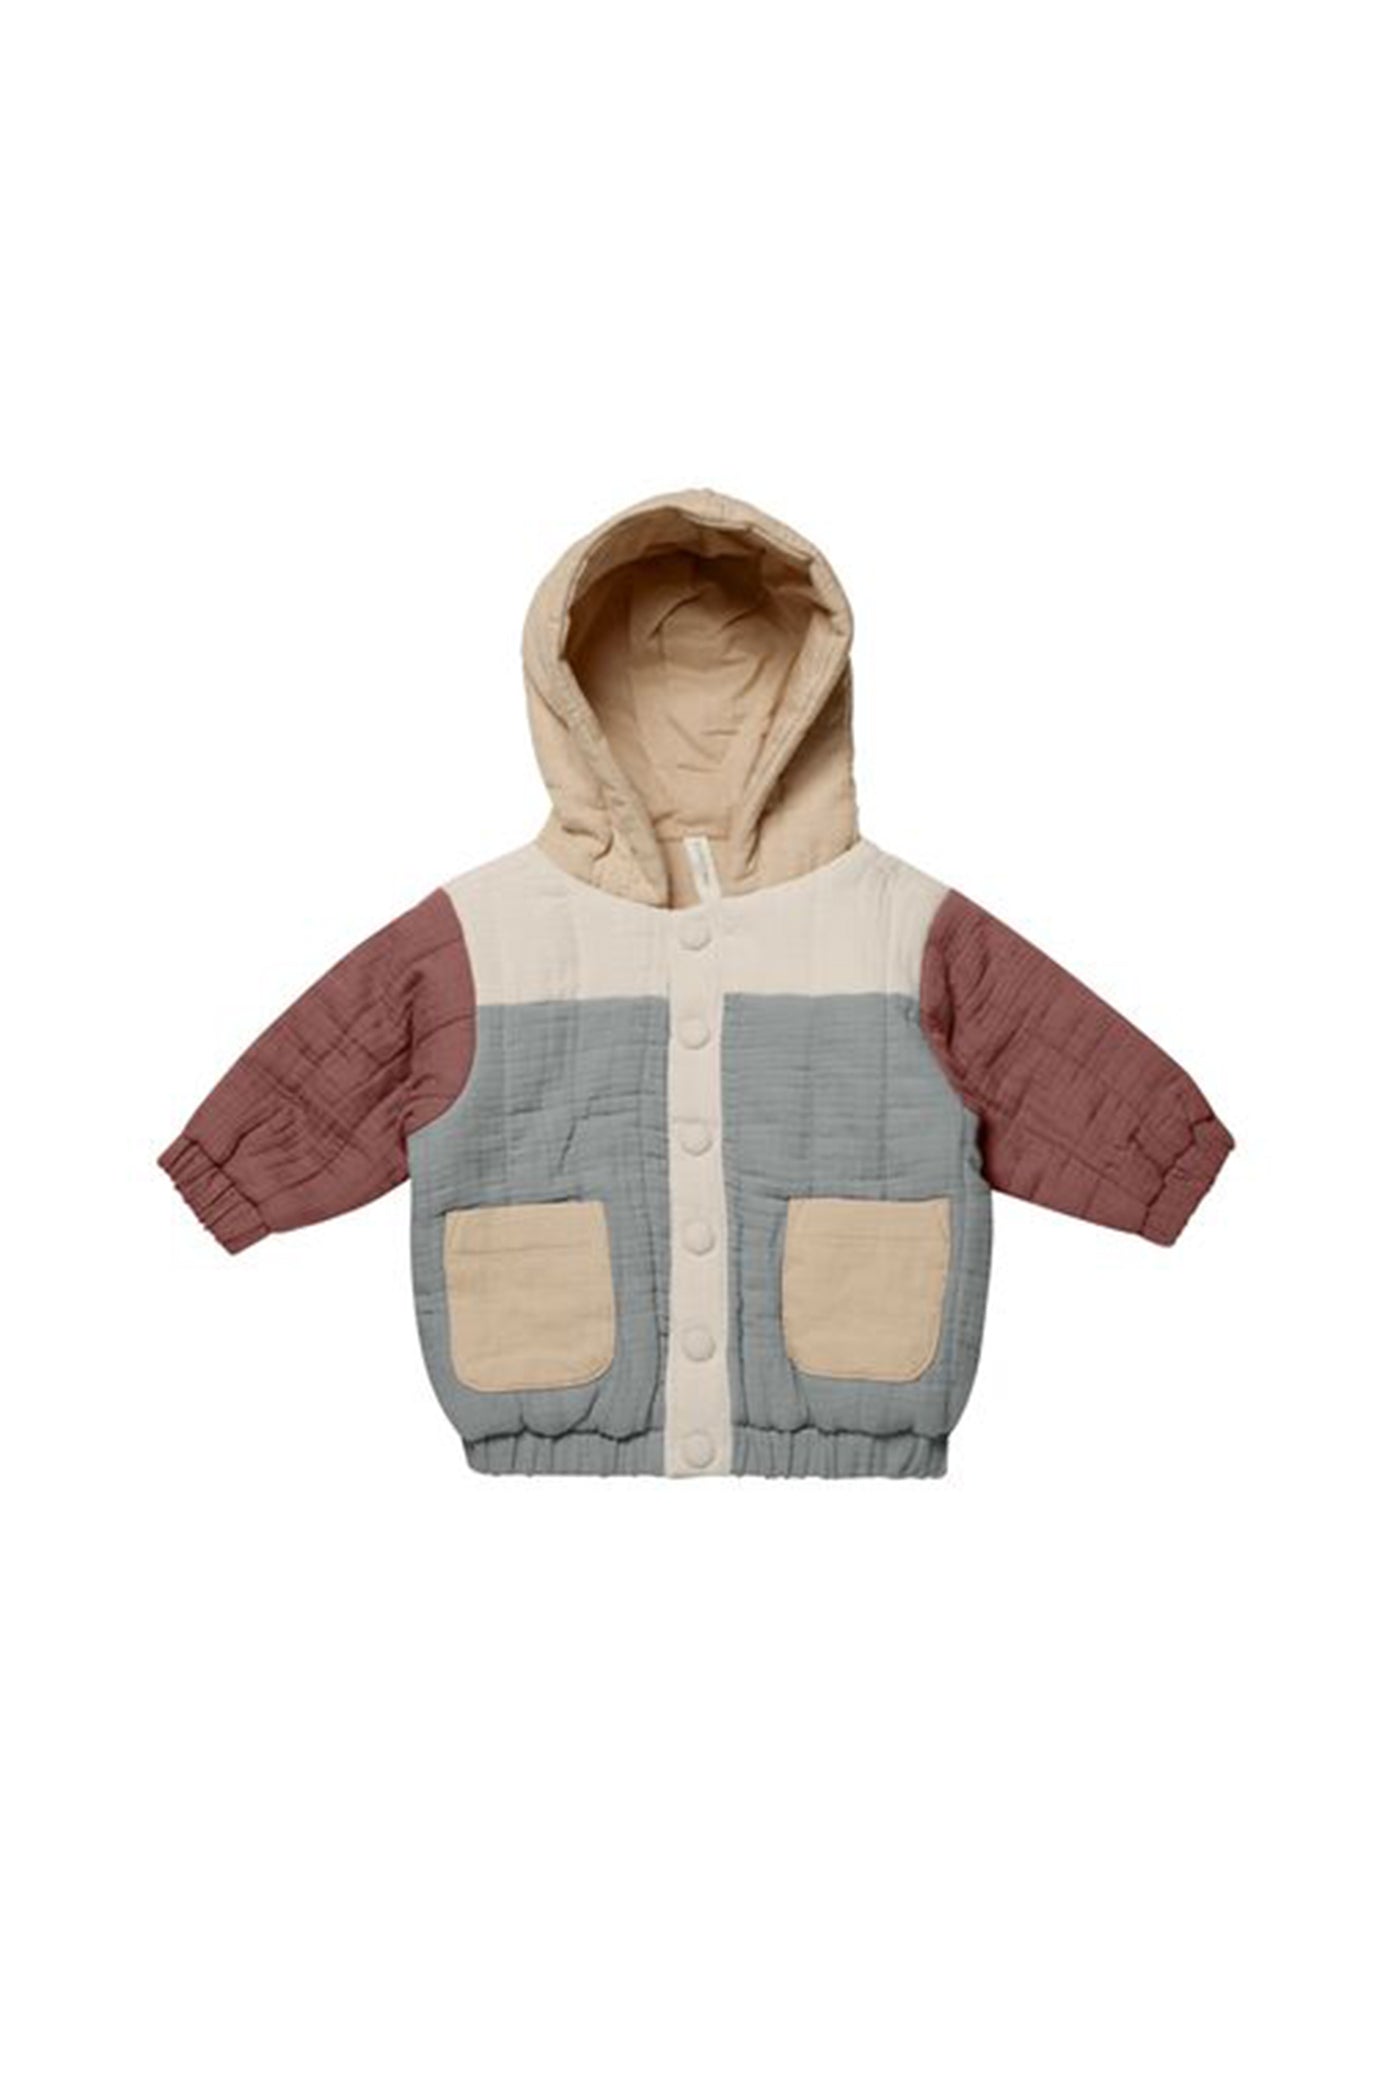 Hooded Woven Kids Jacket by Quincy Mae